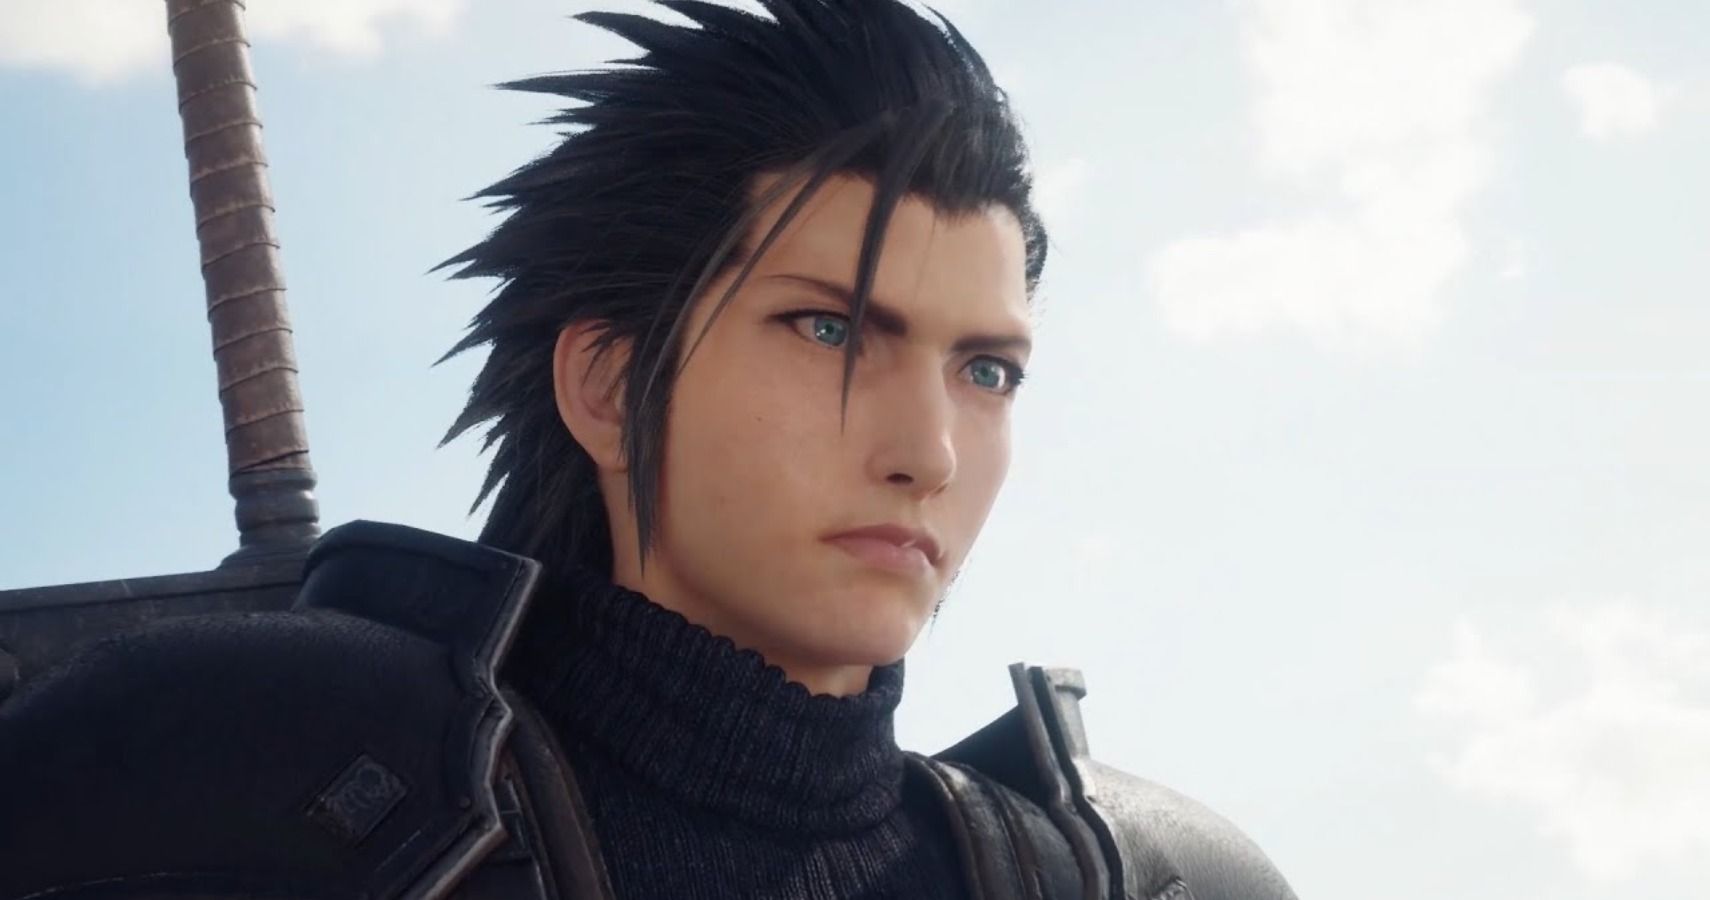 Final Fantasy VII Remake Who The Heck Is Zack